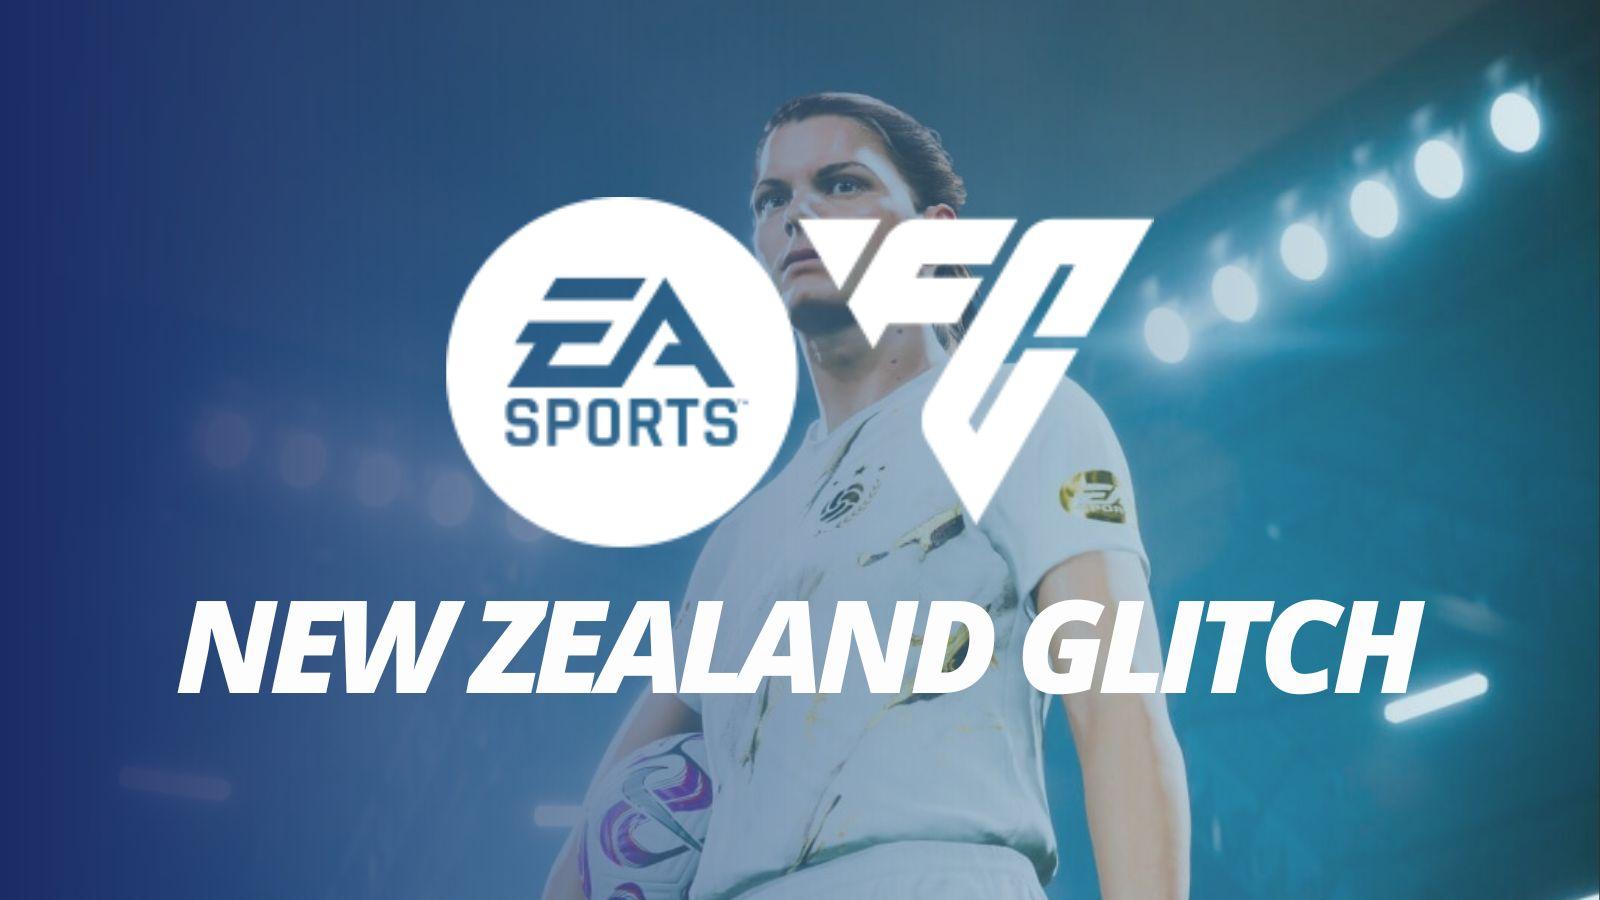 EA Sports FC 24 Early Access: How to Gain Access to the New FIFA